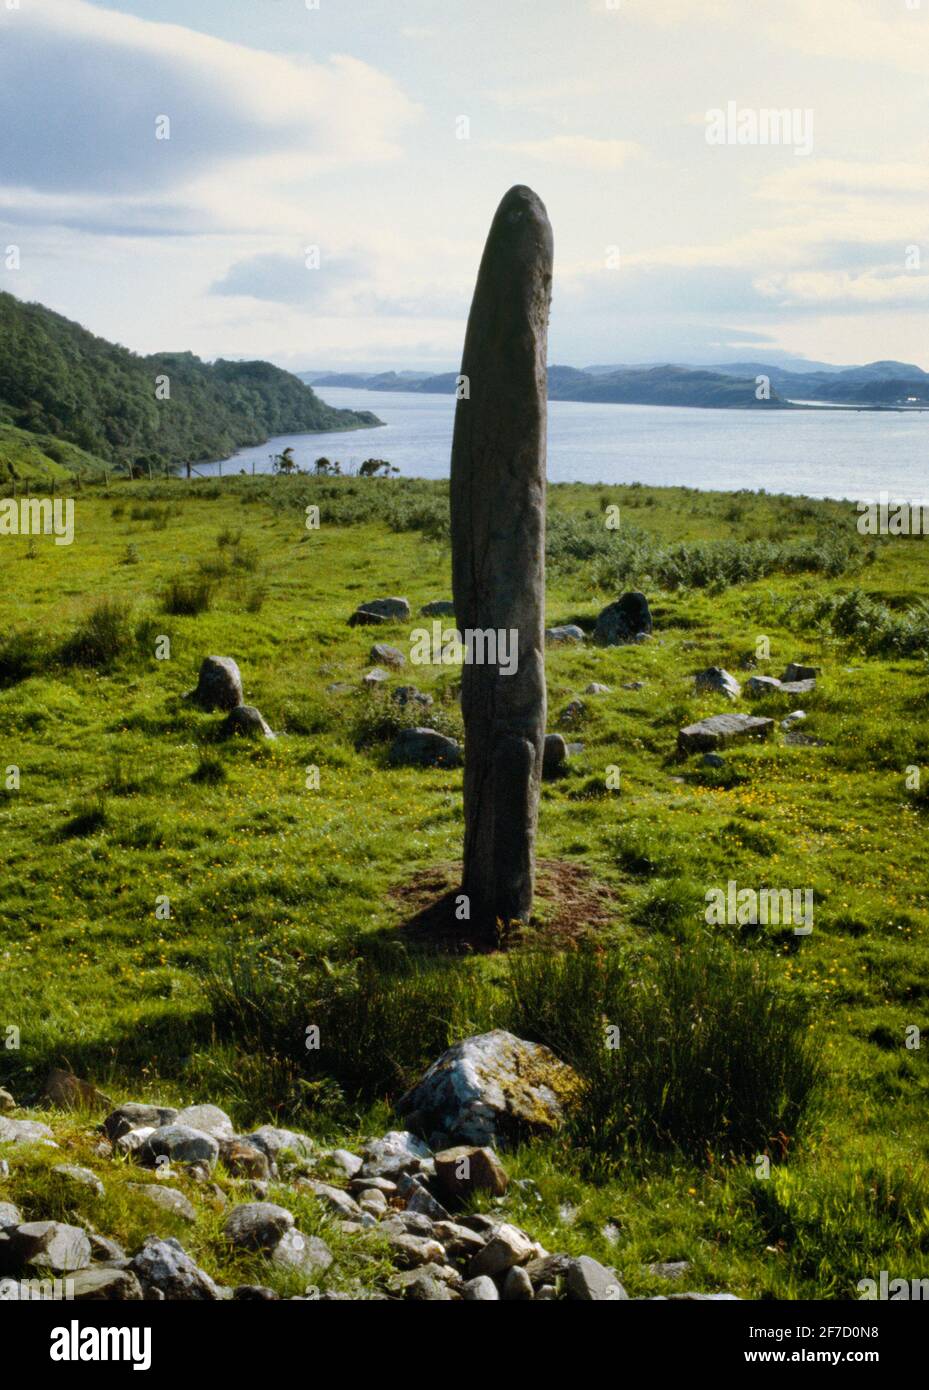 View WSW of Kintraw standing stone between two kerb cairns at the head of Loch Craignish, Mid Argyll, Scotland, UK: Bronze Age winter solstice marker. Stock Photo